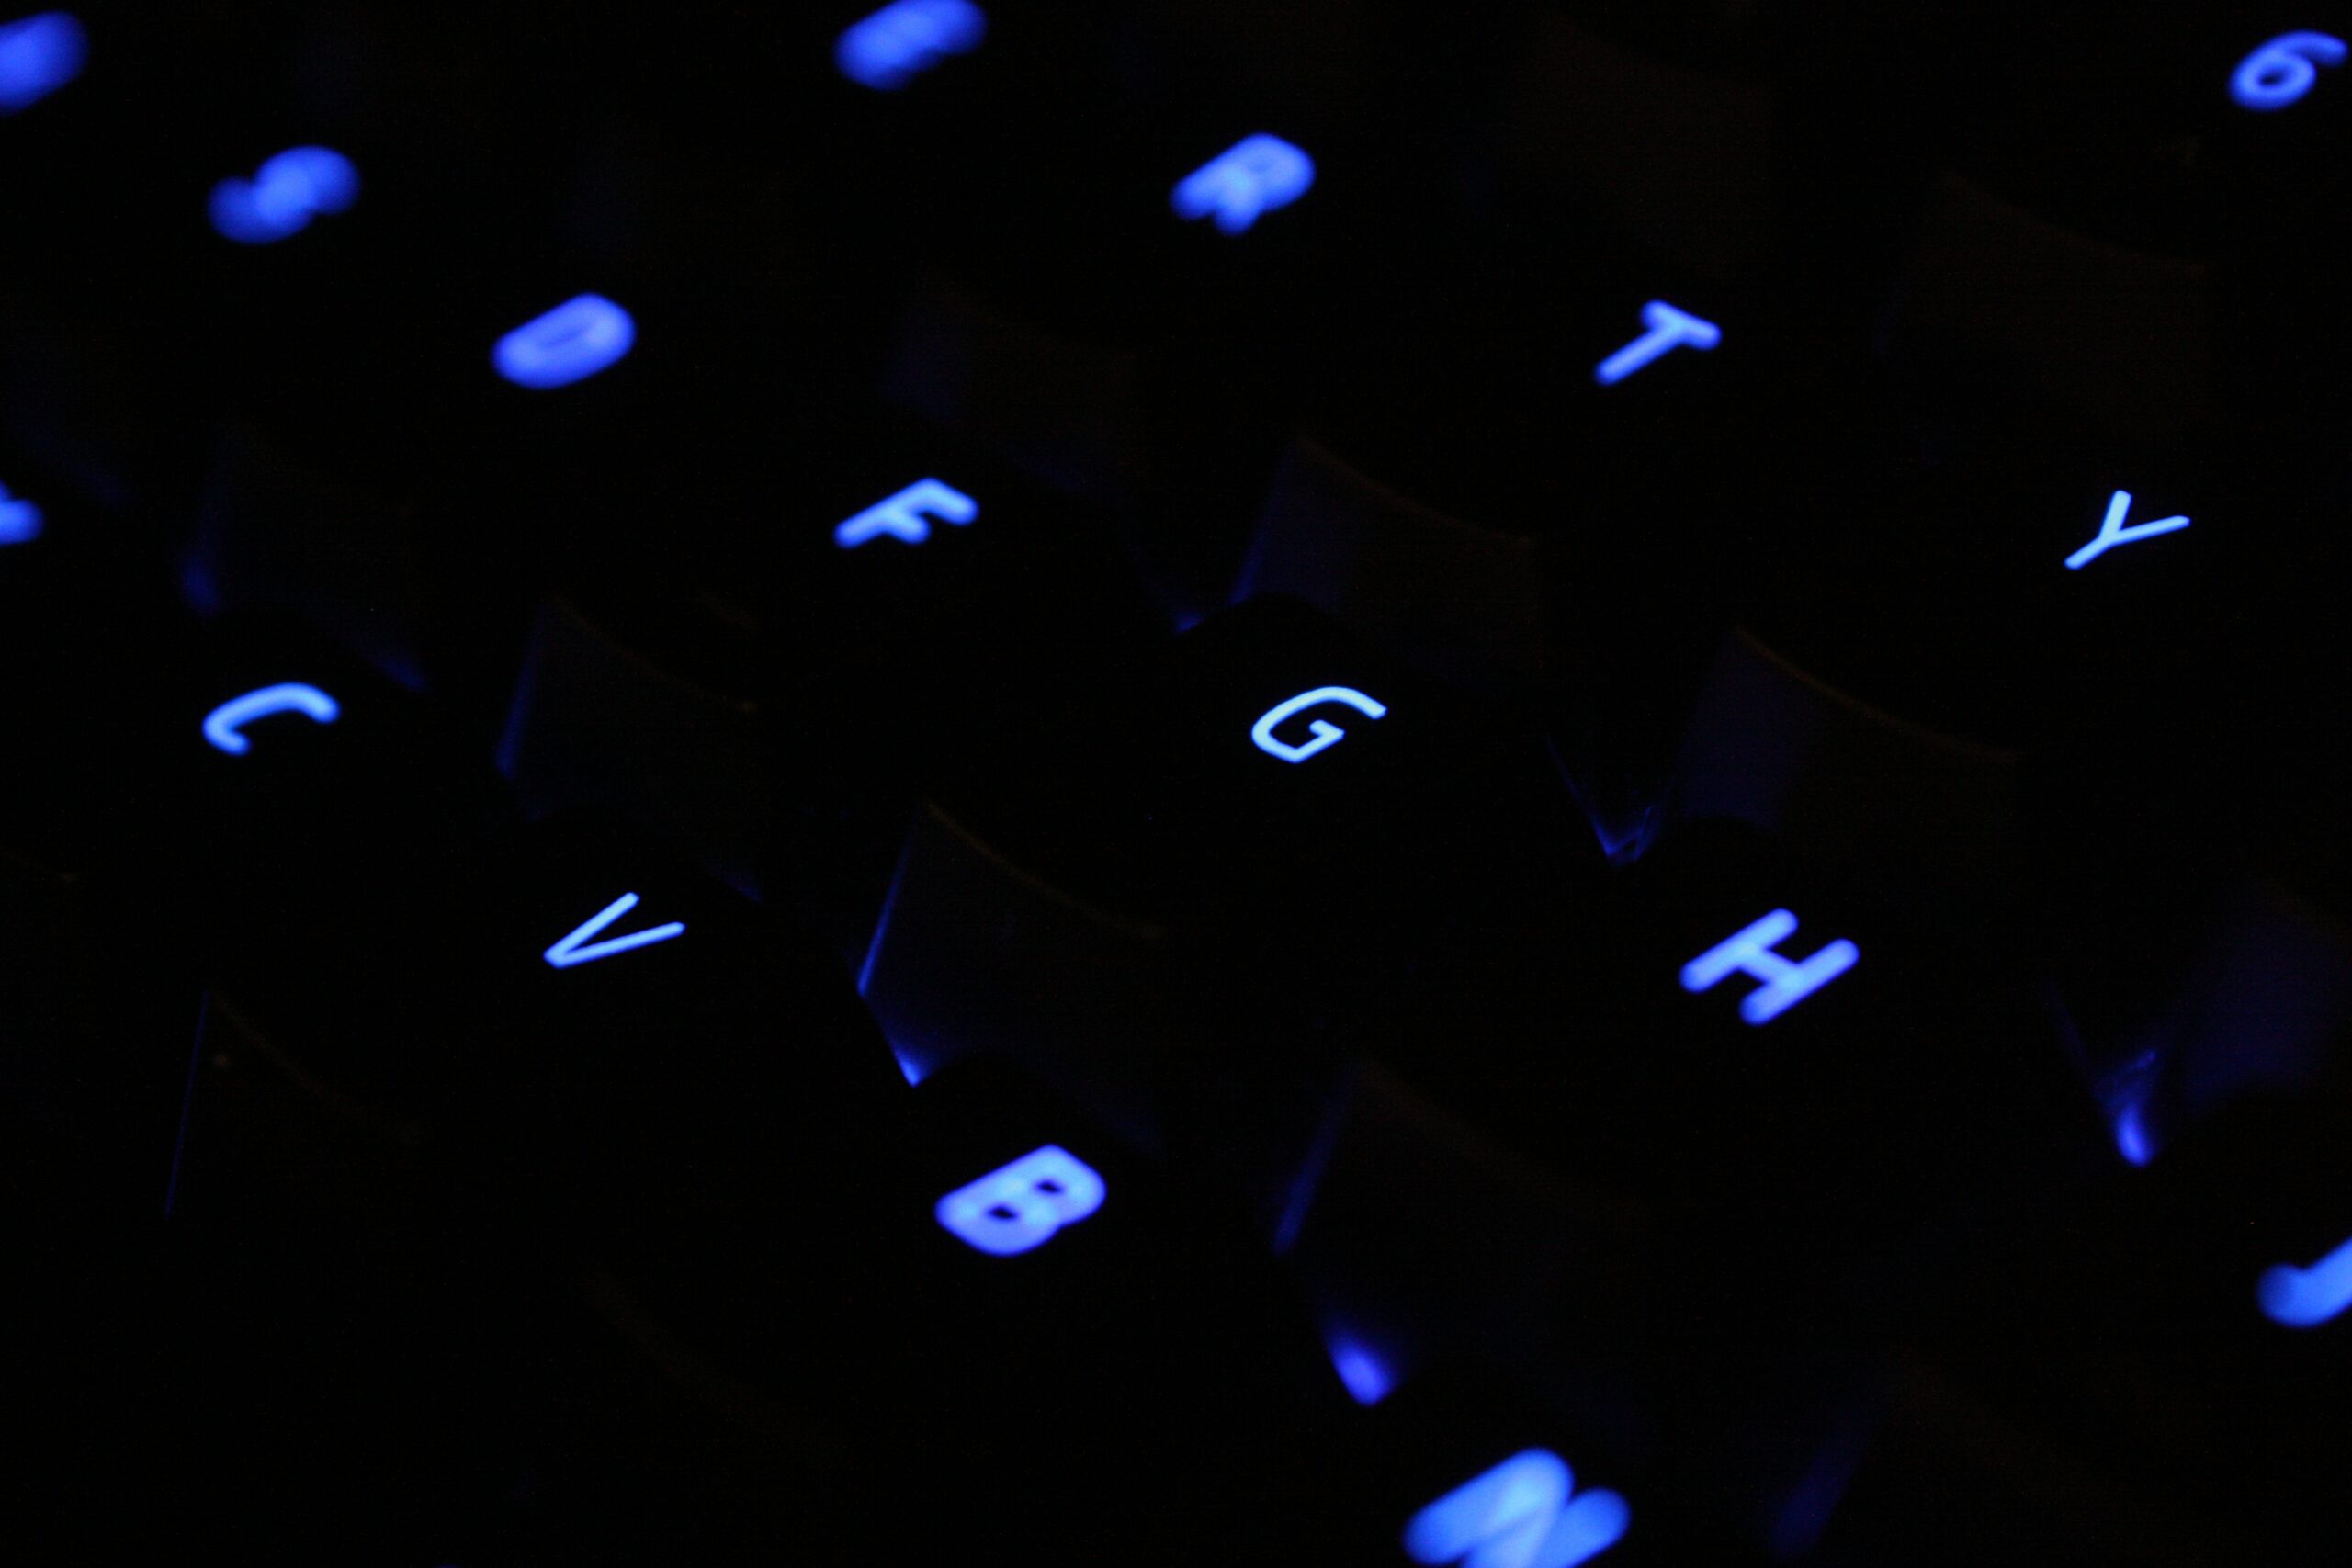 A close-up of a computer keyboard with light-up blue keys